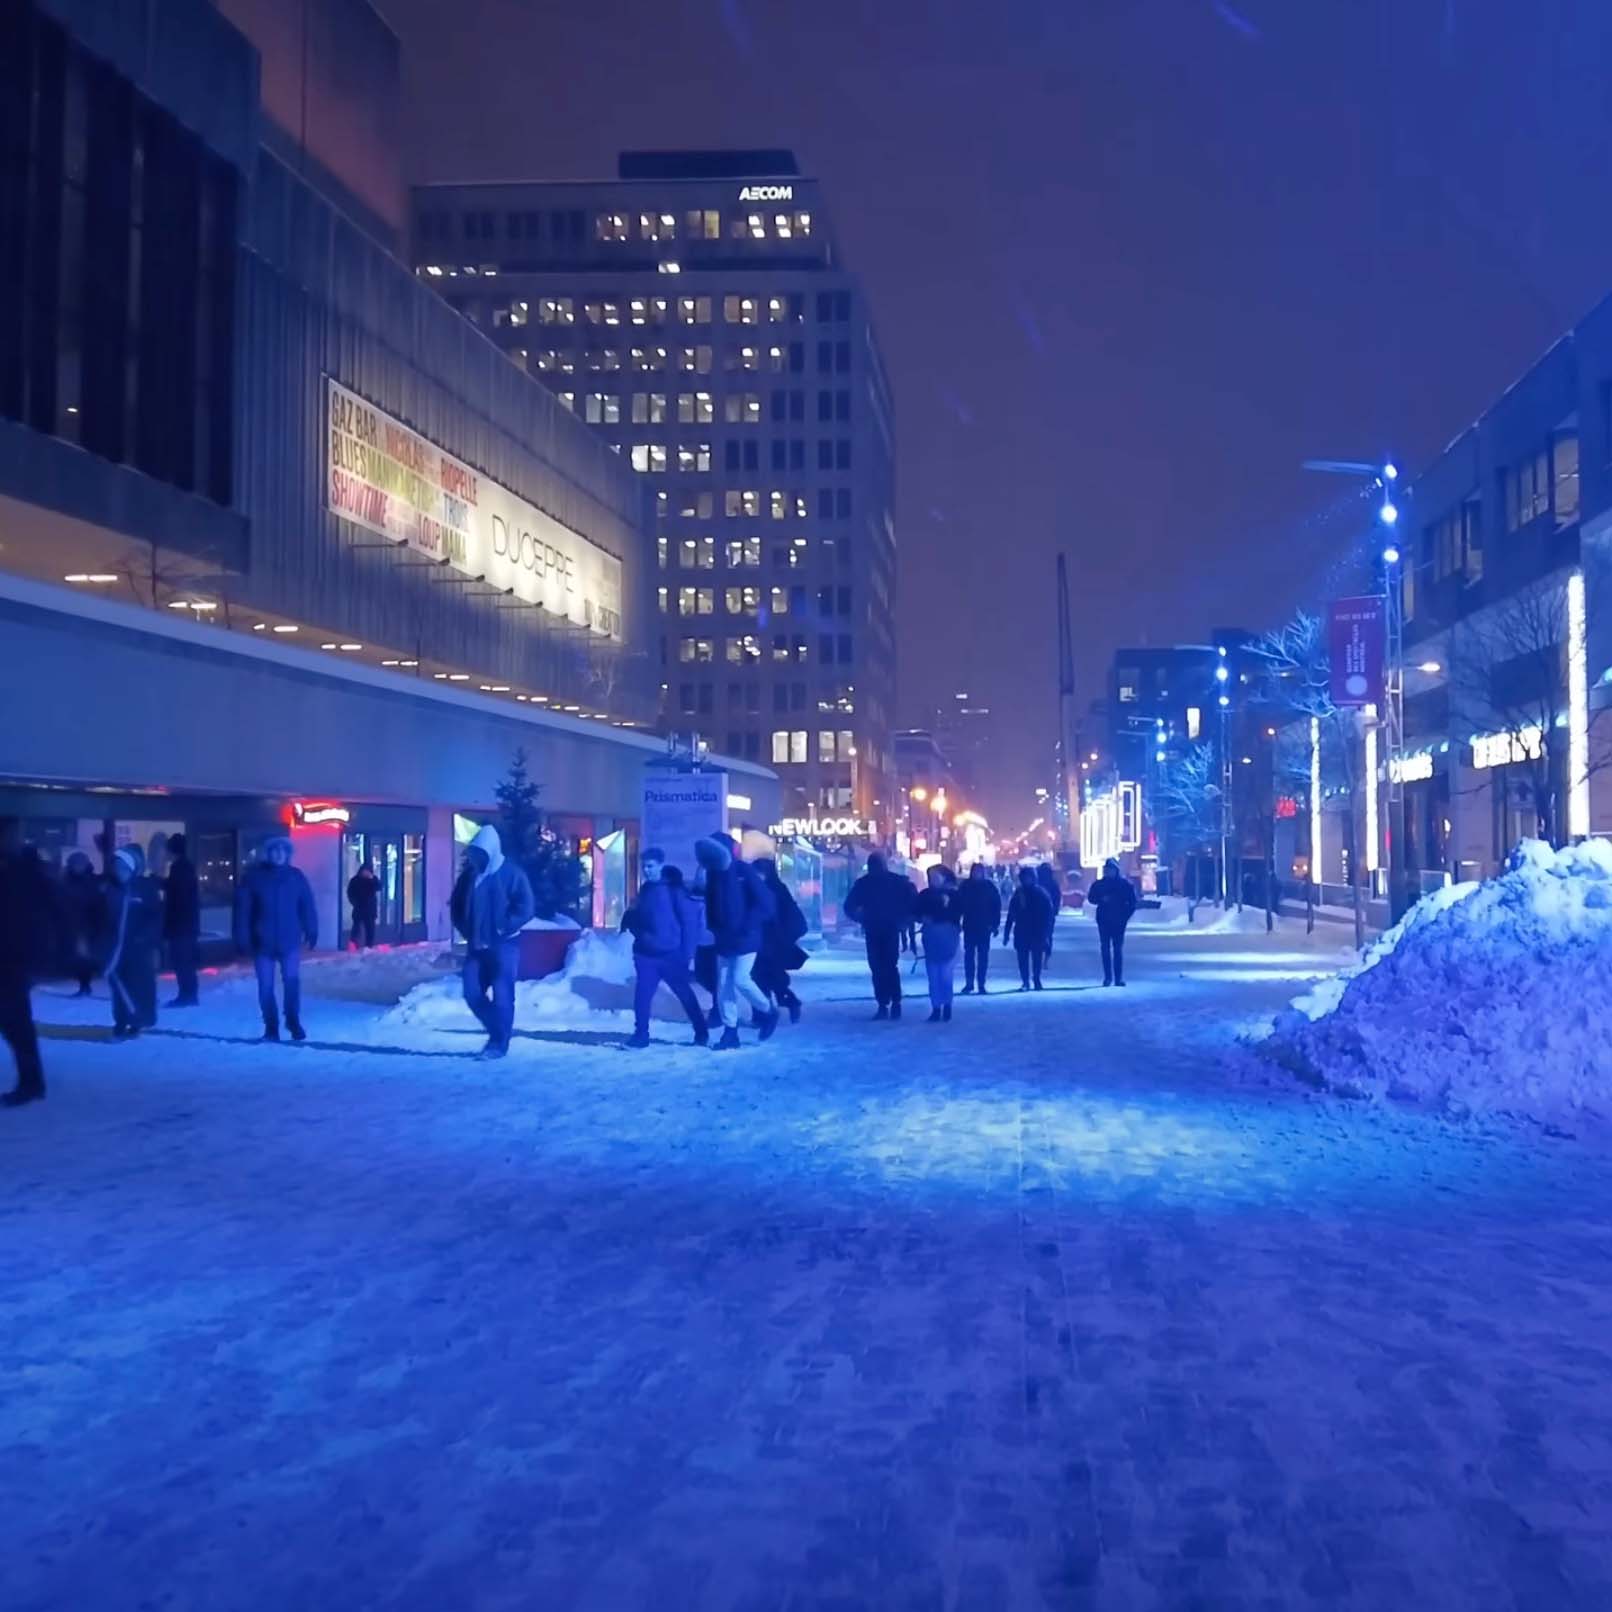 A winter night on the pedestrian zone of Saint Catherine street. The street is illuminated with intense blue lights. People walk in front of the entrance of Place des arts. A mound of plowed snow is pushed neatly to the side.